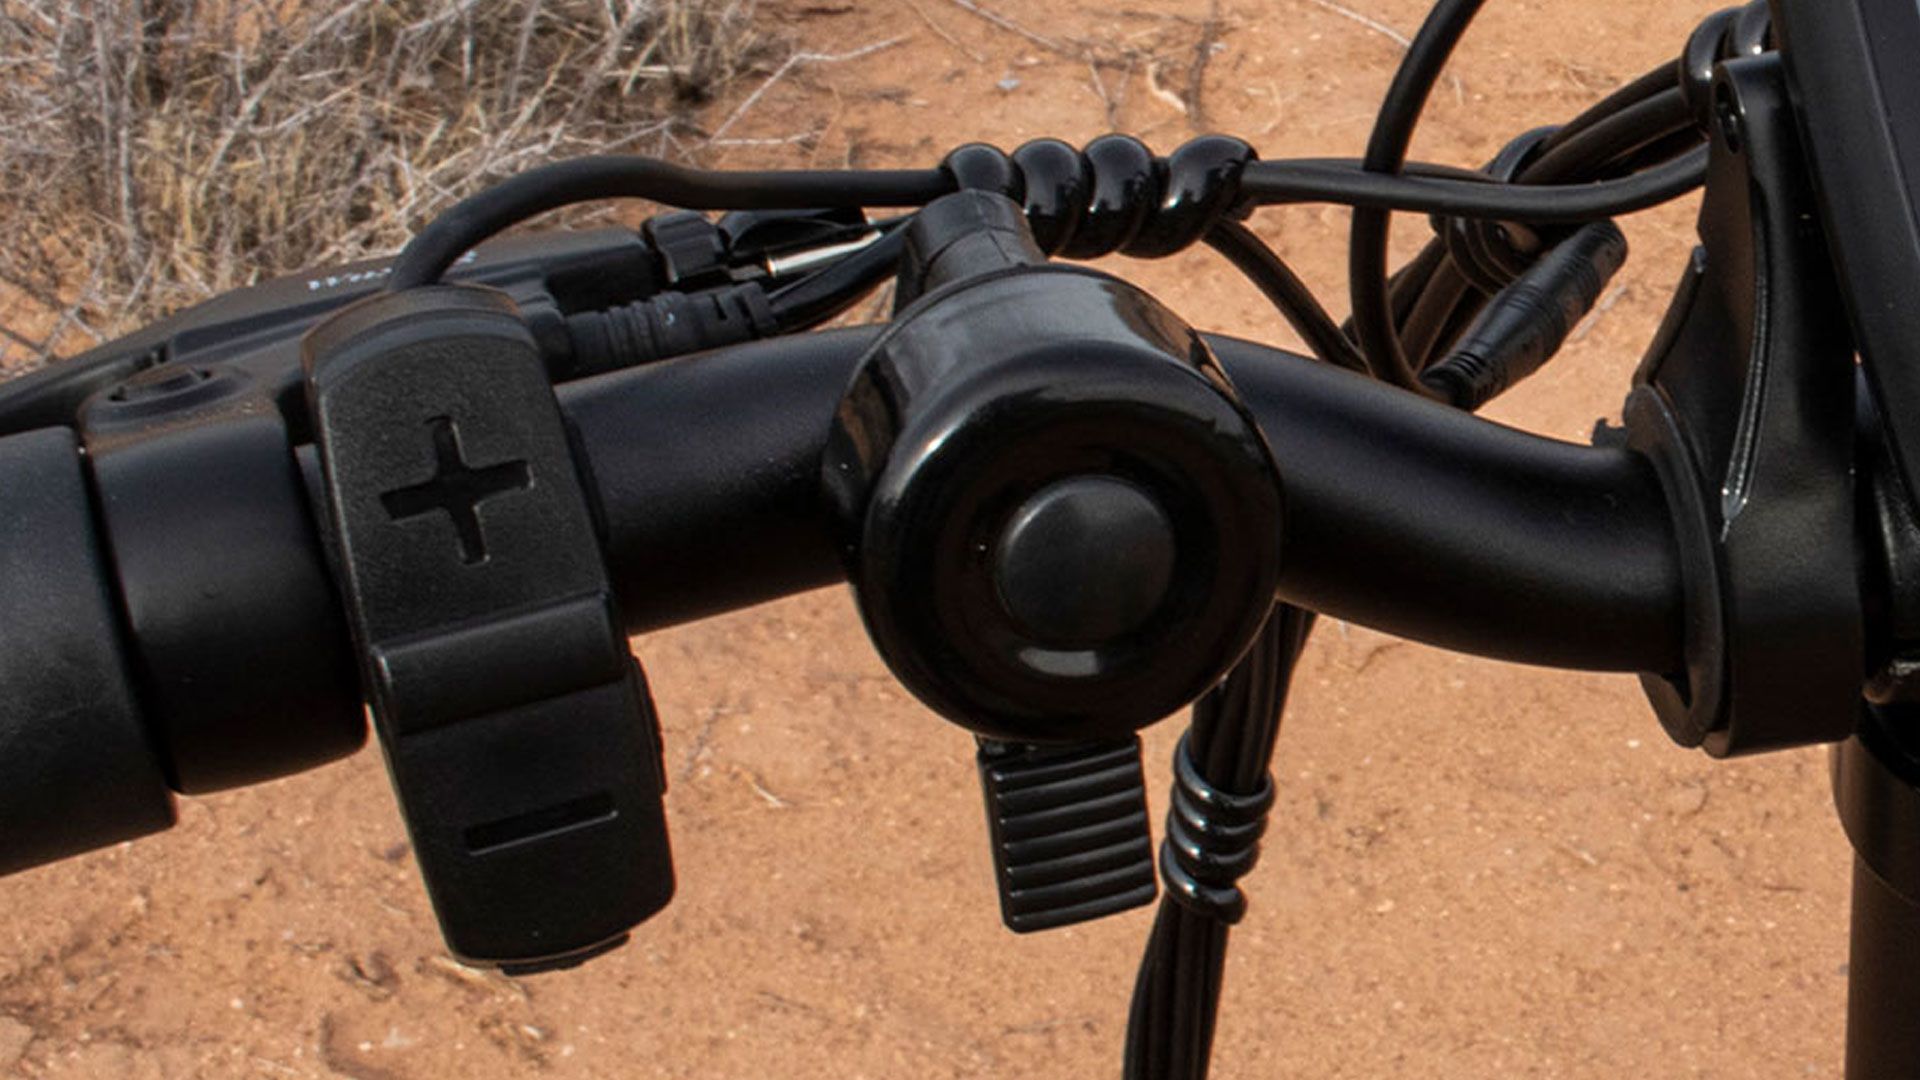 Pedal assist shifter and bell attached to ENGWE EP-2 Pro handlebar.